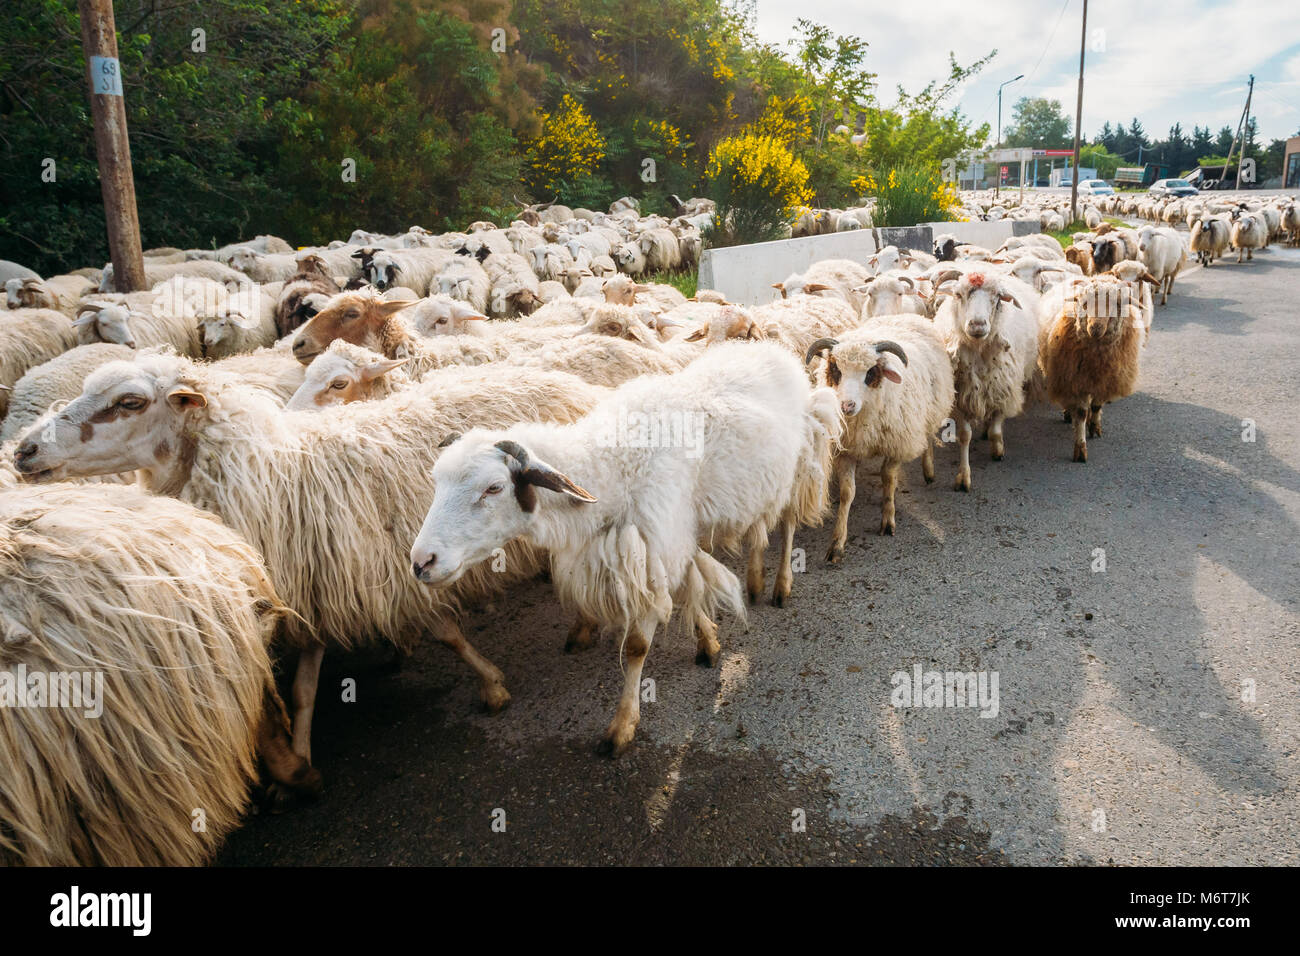 Georgia, Caucasus. Close View Of The Flock Of Unshorn Sheep Moving On The Asphalt Road In The Rural Area. Stock Photo